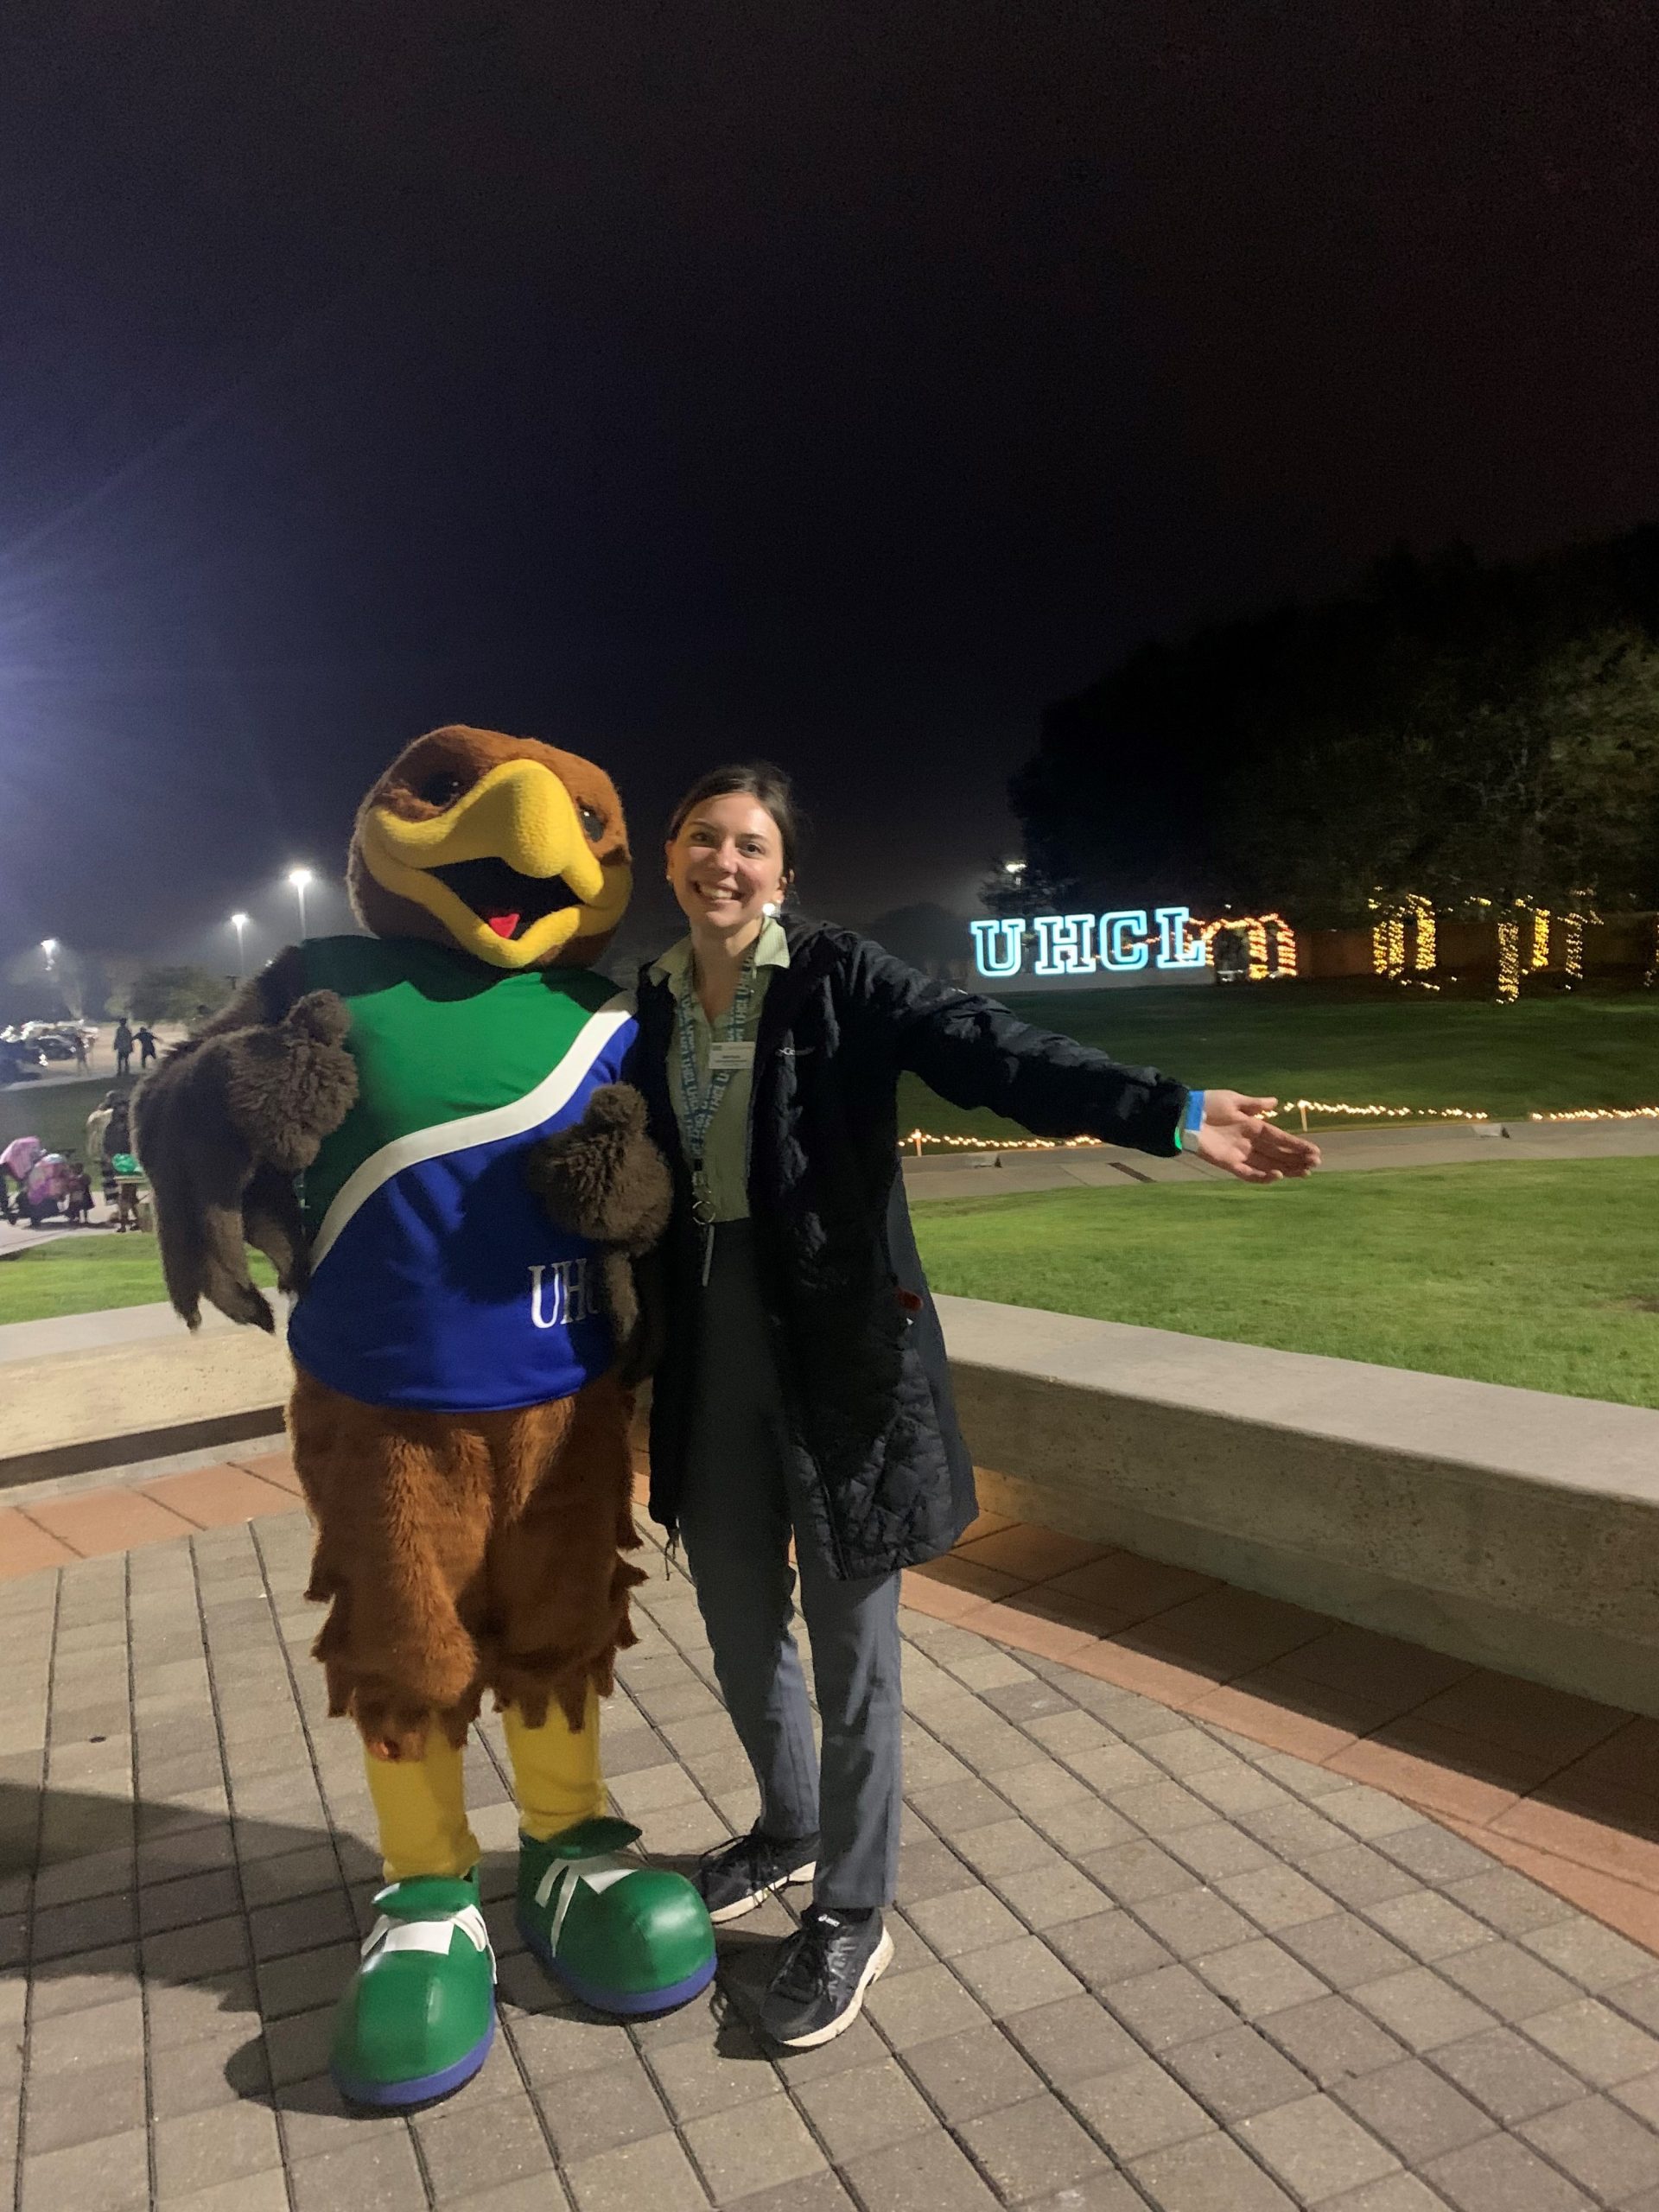 IMAGE: A photograph of Shelby Kuepker (right) standing next to UHCL Mascot Hunter the Hawk (left). In the background is the UHCL letters hill, lit up at night alongside a few trees with string lights wrapped around them.